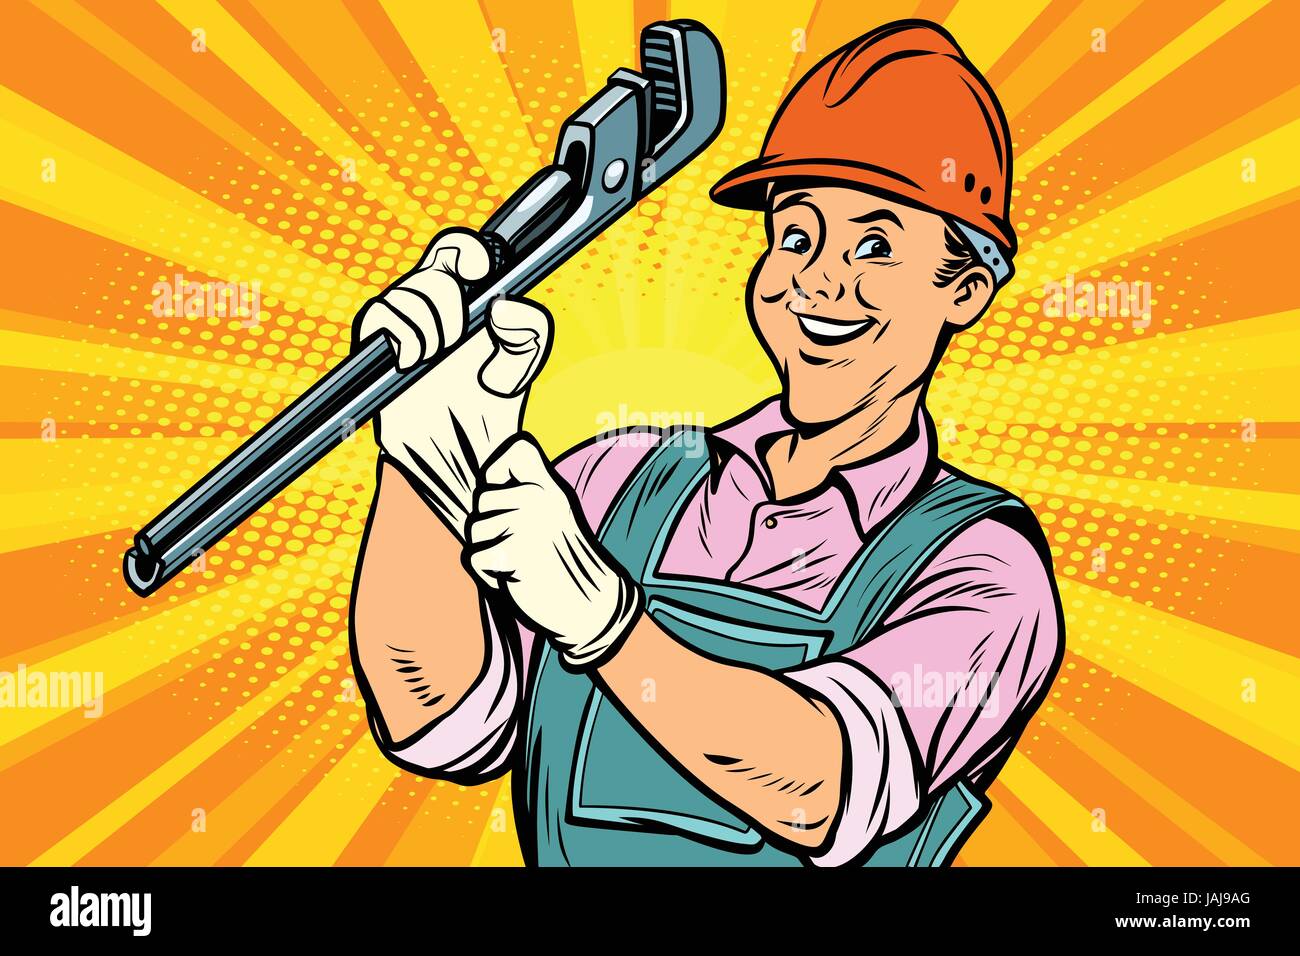 Construction worker with adjustable wrench Stock Vector